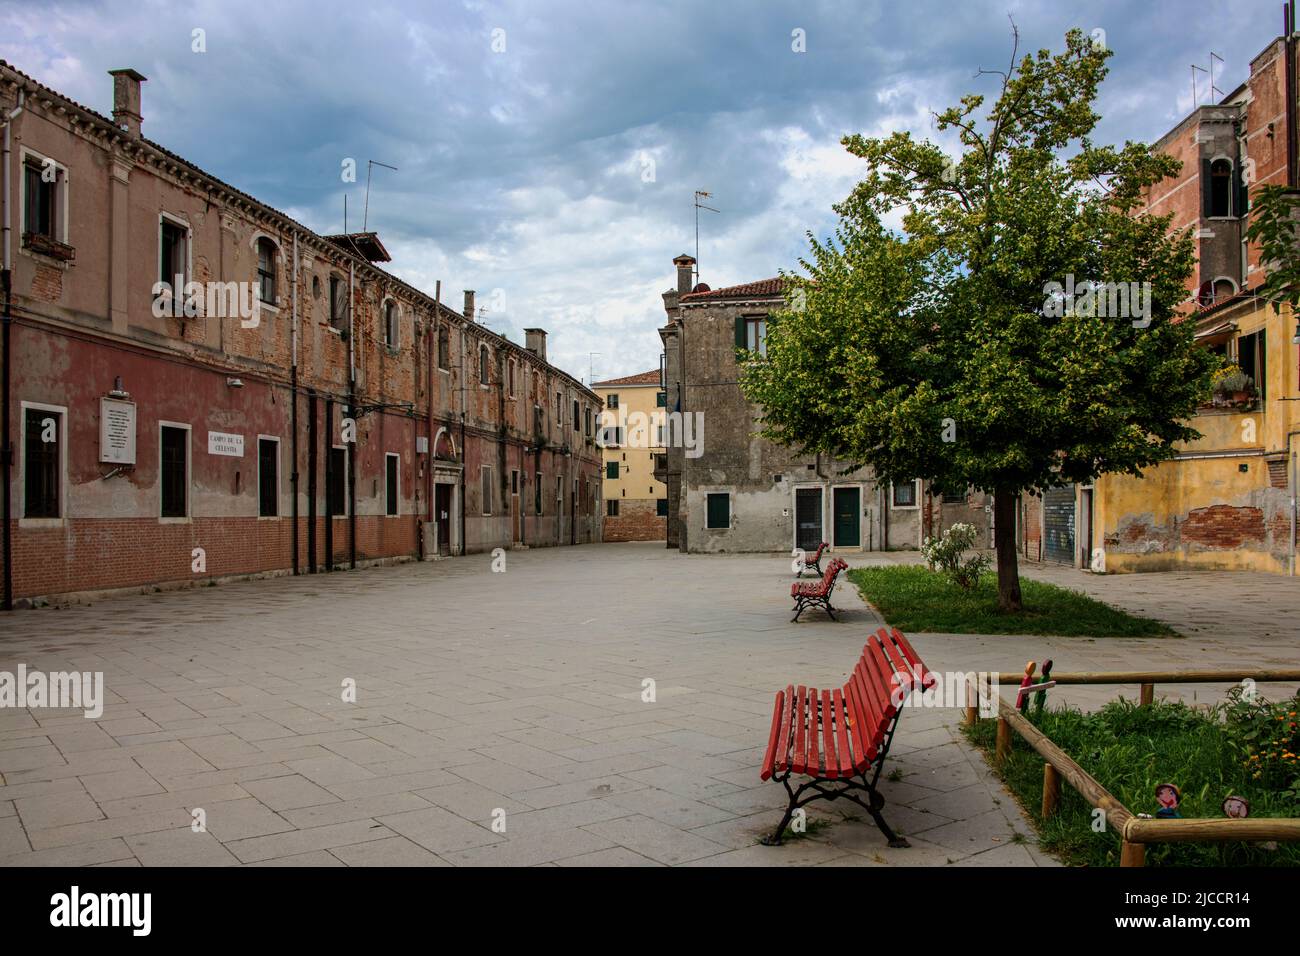 Empty public place with benches and trees under the cloudy sky Stock Photo